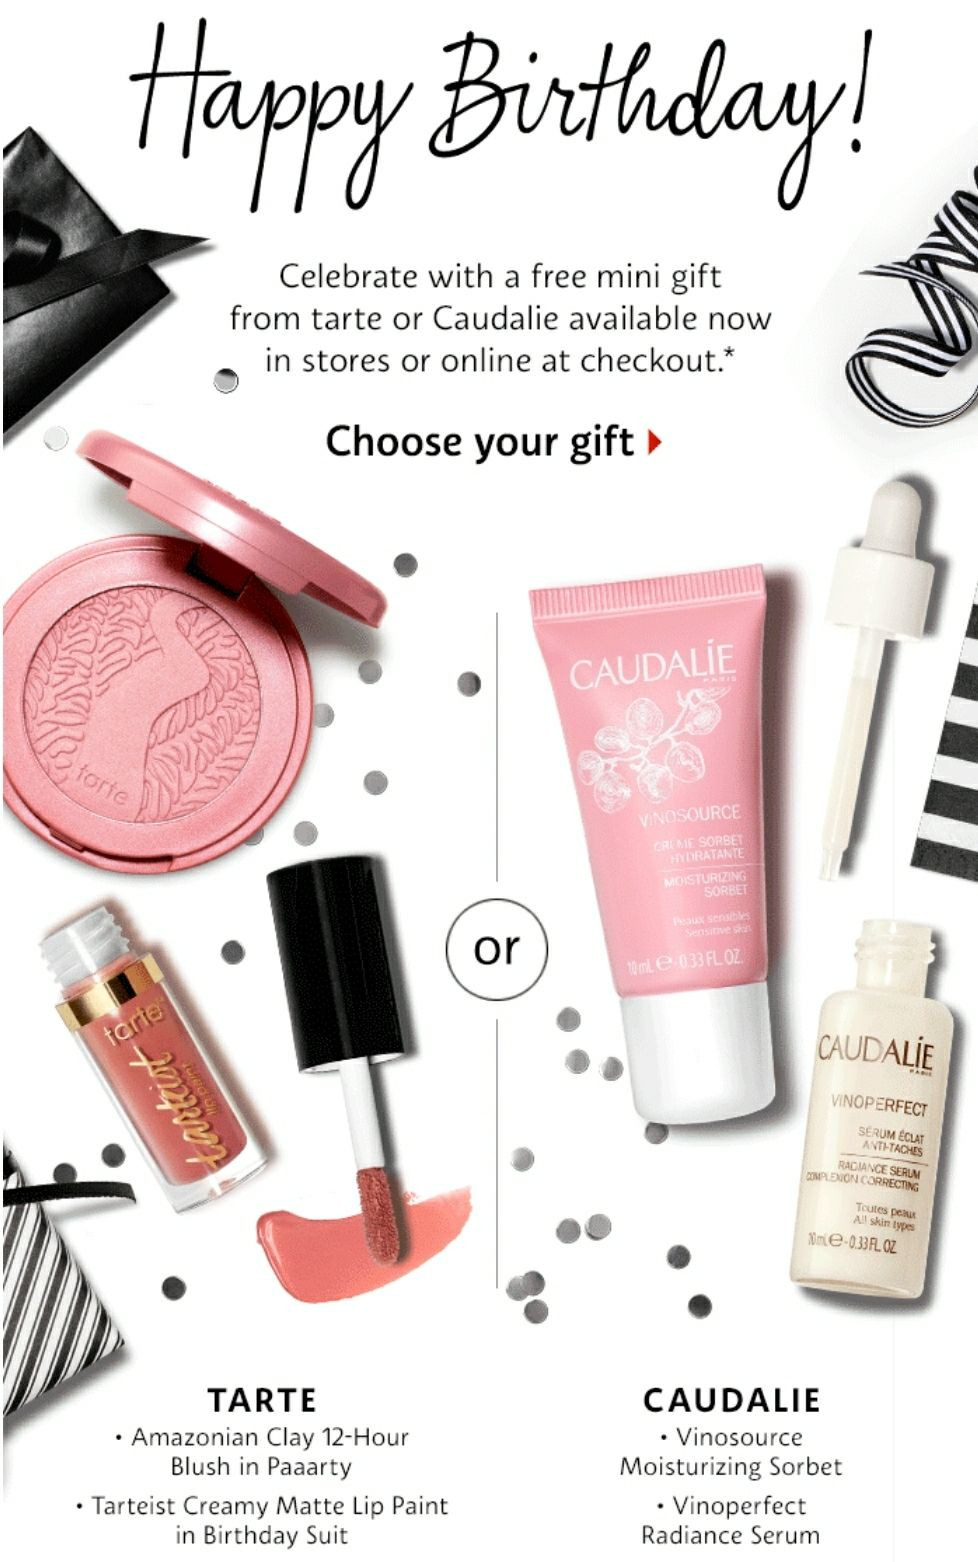 The Best Ideas for Sephora Free Birthday Gift Home, Family, Style and